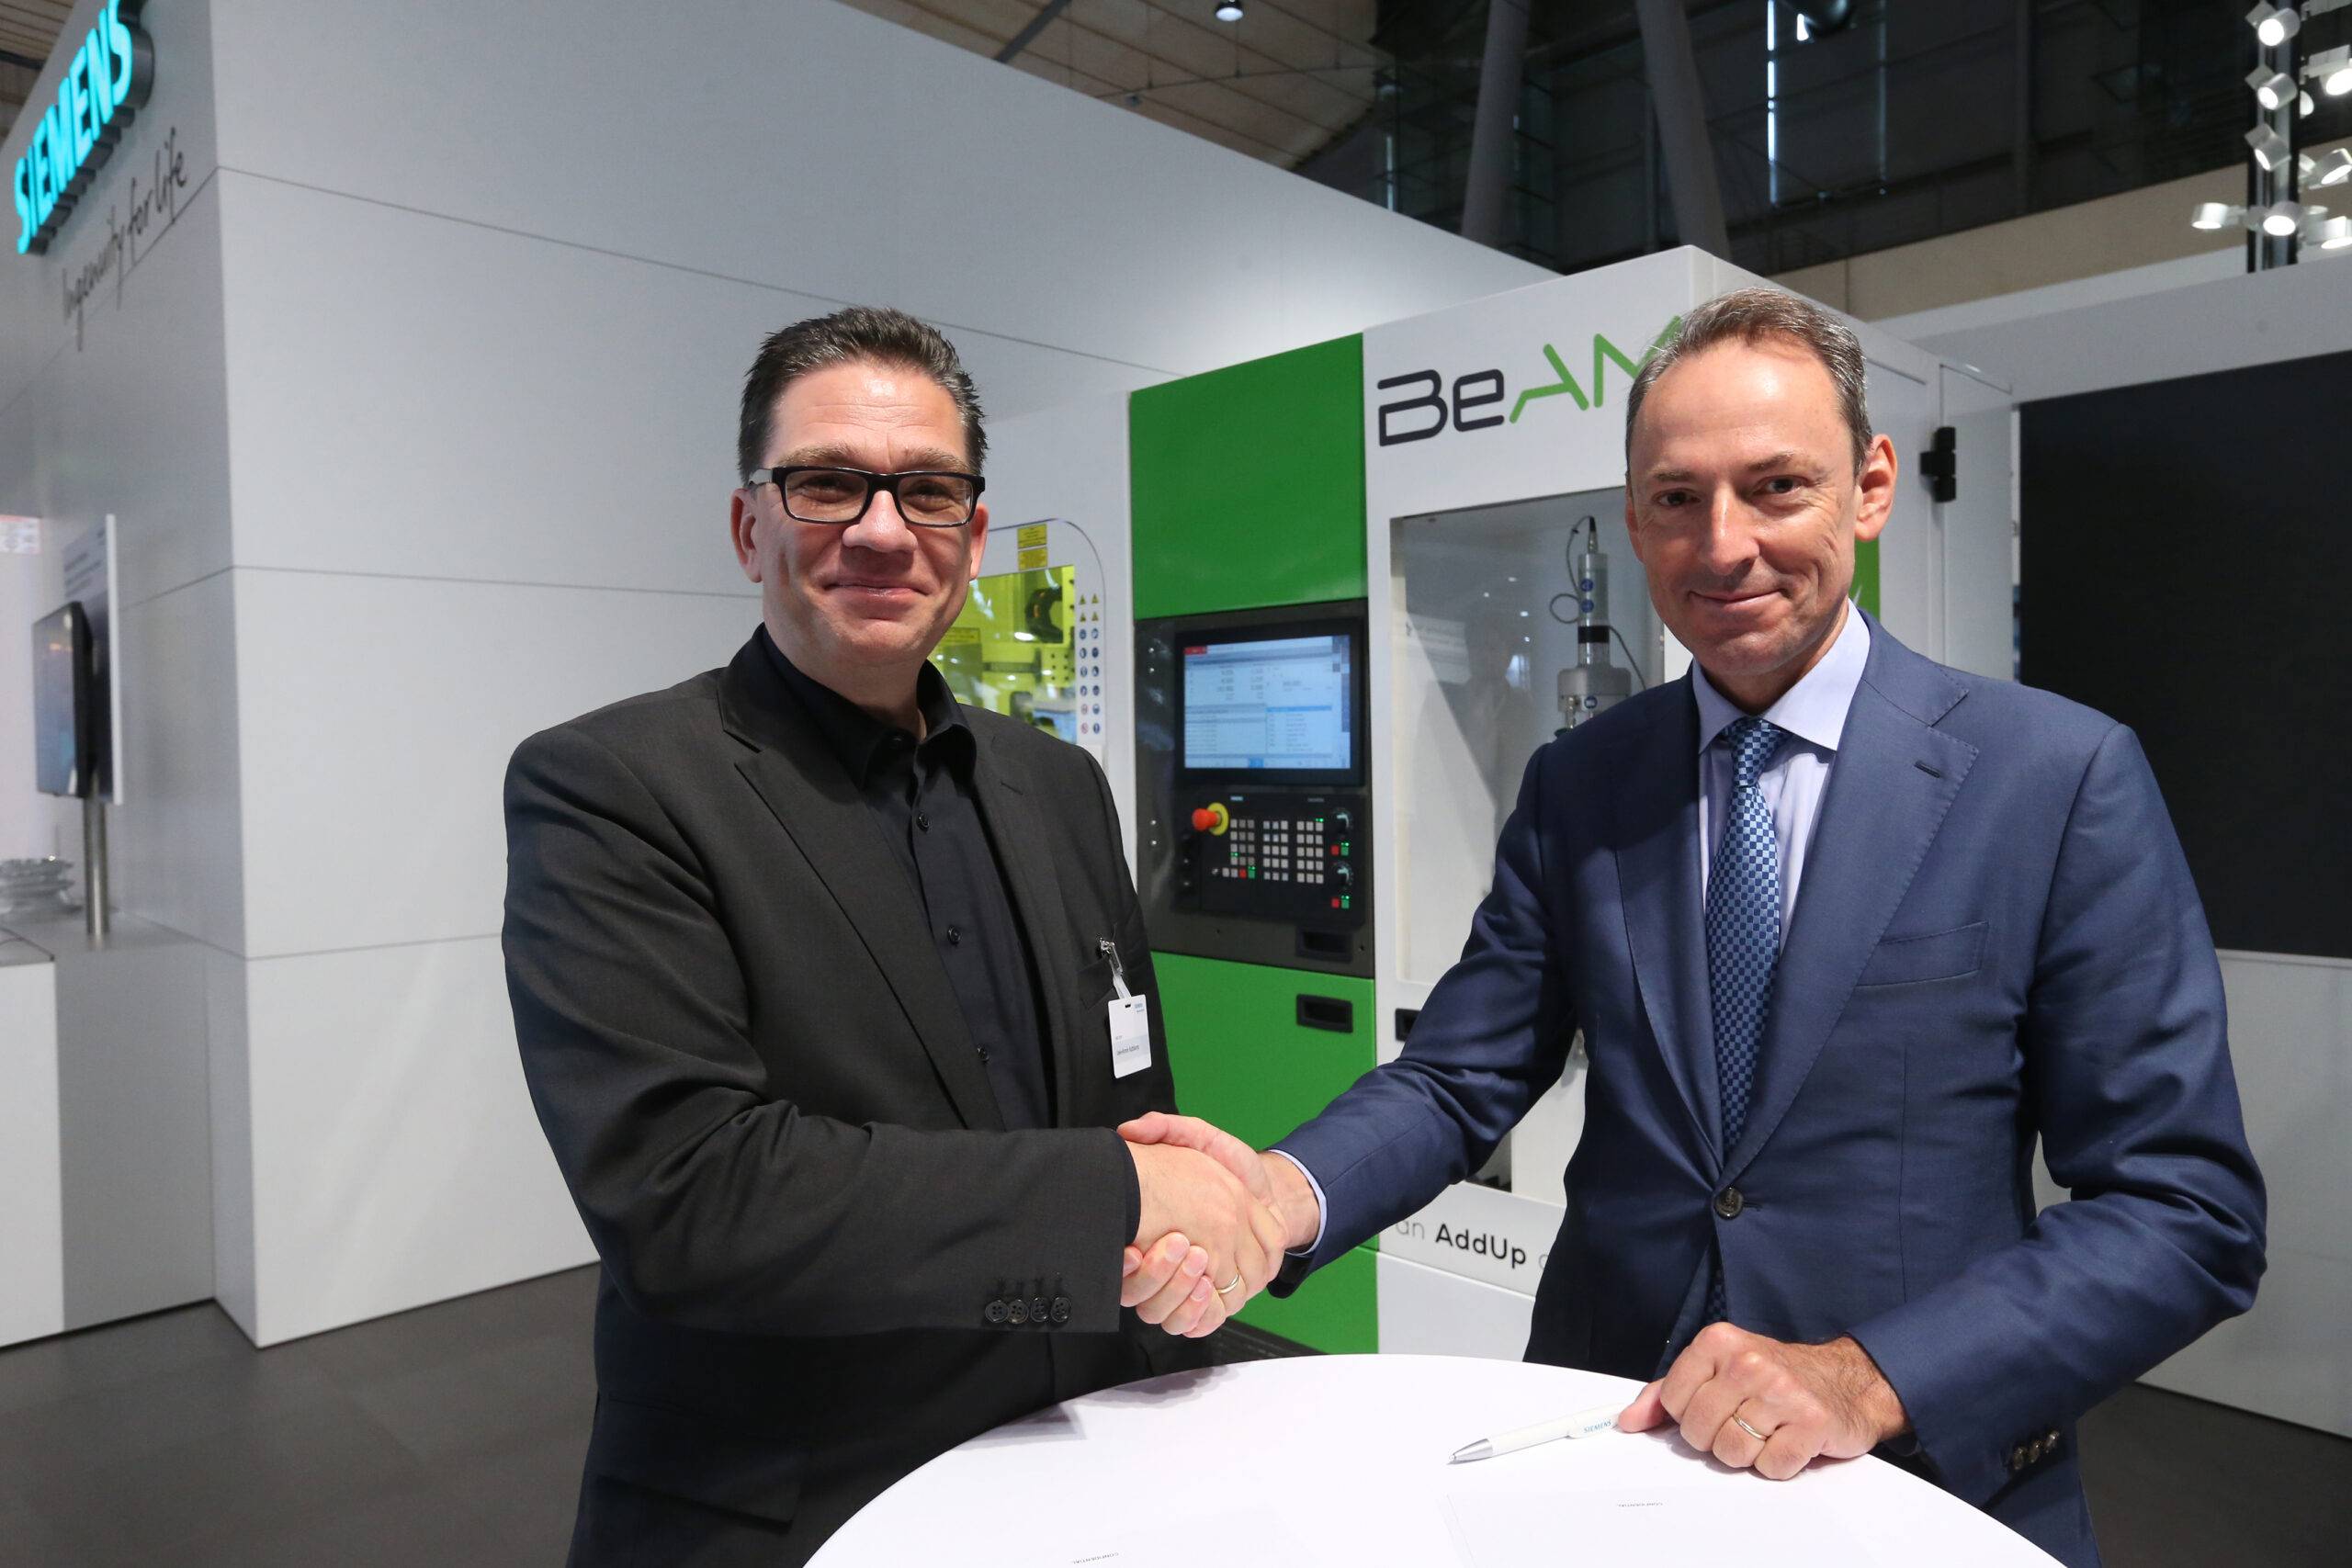 Uwe Ruttkamp, Head of Machine Tool Systems at Siemens Digital Industries and Vincent Gillet, CEO of BeAM.